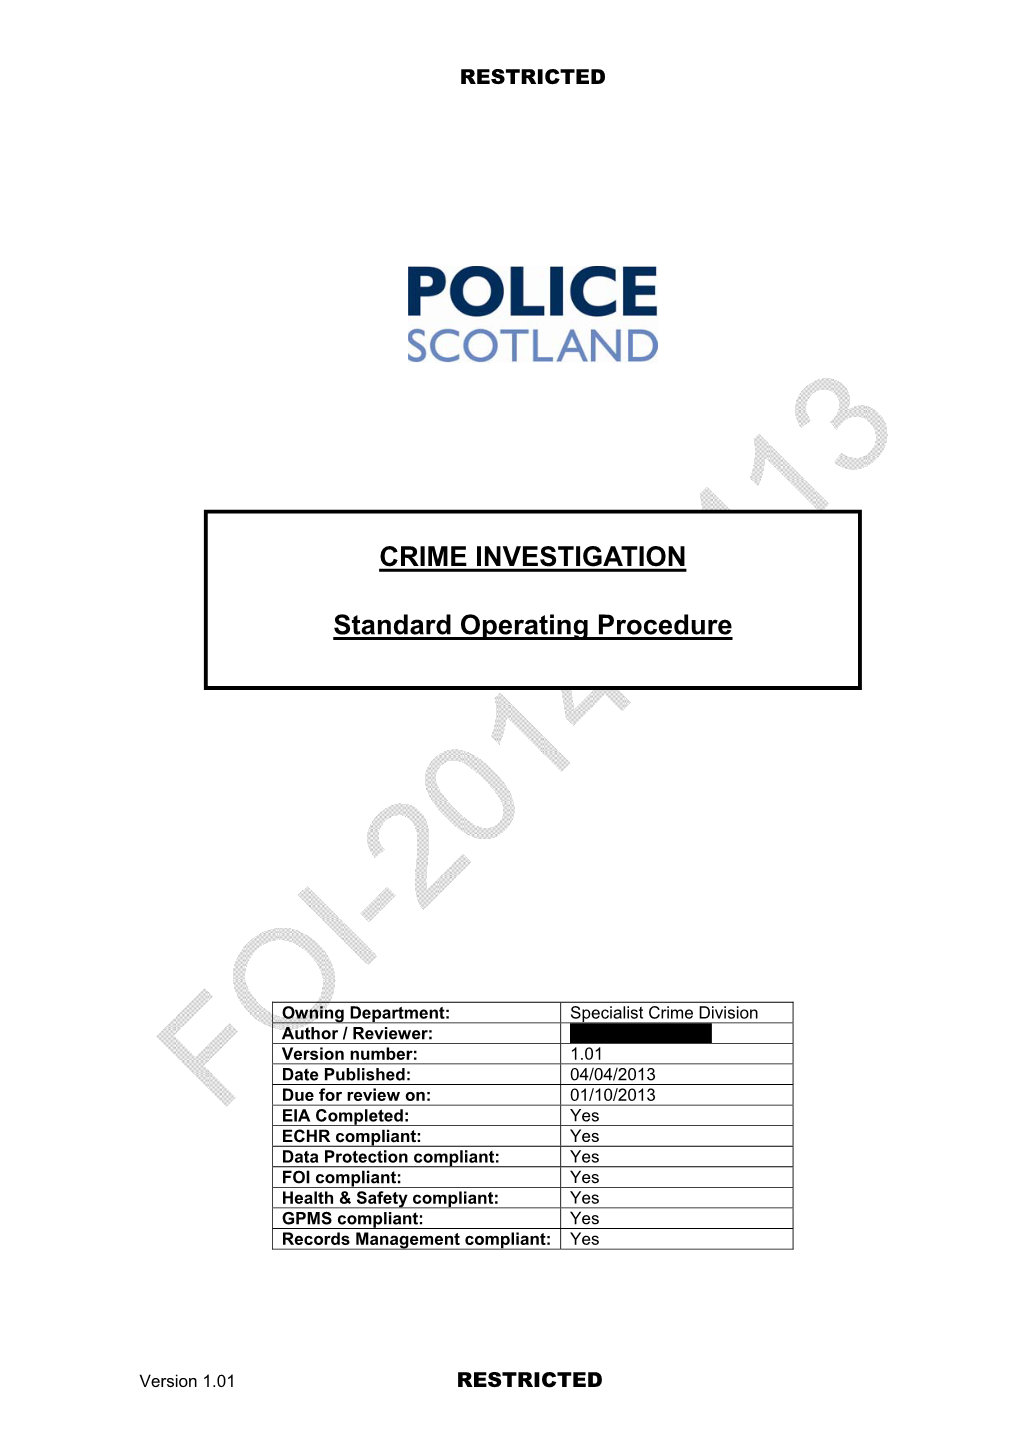 SOP) Provides Officers / Police Staff with a General Guide to the Investigation of Crime